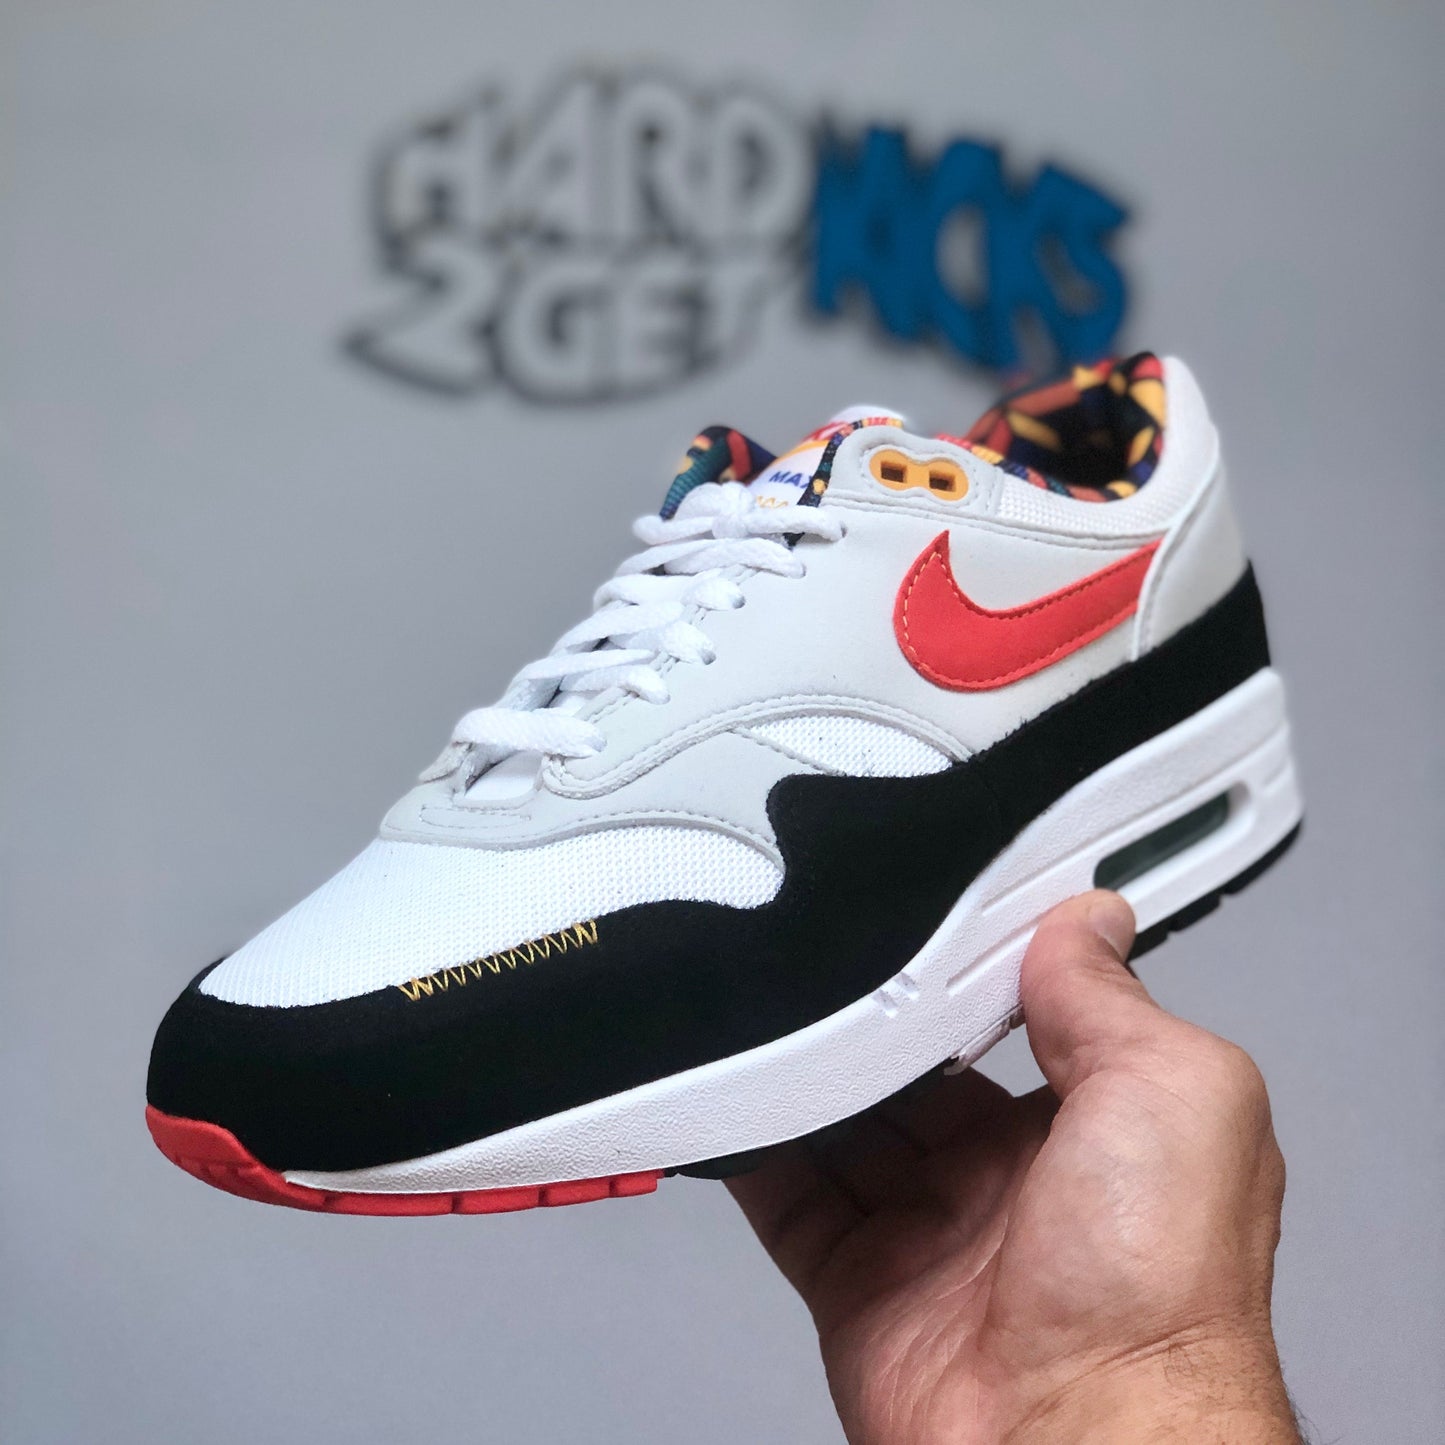 Nike Air Max 1 - Live Together (USA Exclusive)